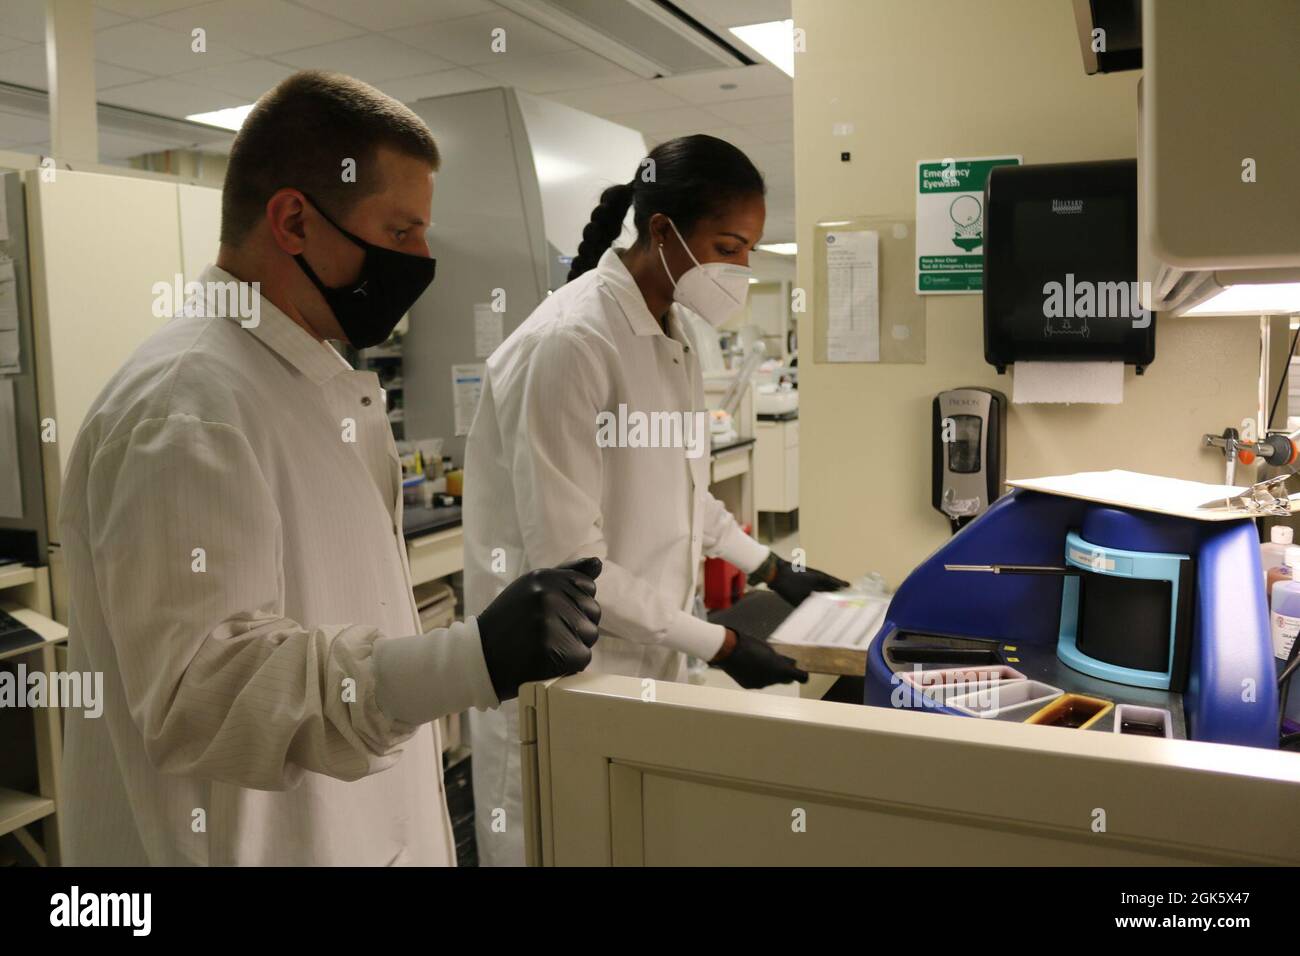 Two medical laboratory specialists, Spc. Eric Thompson (left) and Spc. Kershia Mukoro (right), identify different types of bacteria using the Automated Gram Stainer in the Evans Army Community Hospital Laboratory during their U.S. Army Reserve Annual Training with the 7450th Medical Operations Readiness Unit (MORU) Aug. 10, 2021. Stock Photo